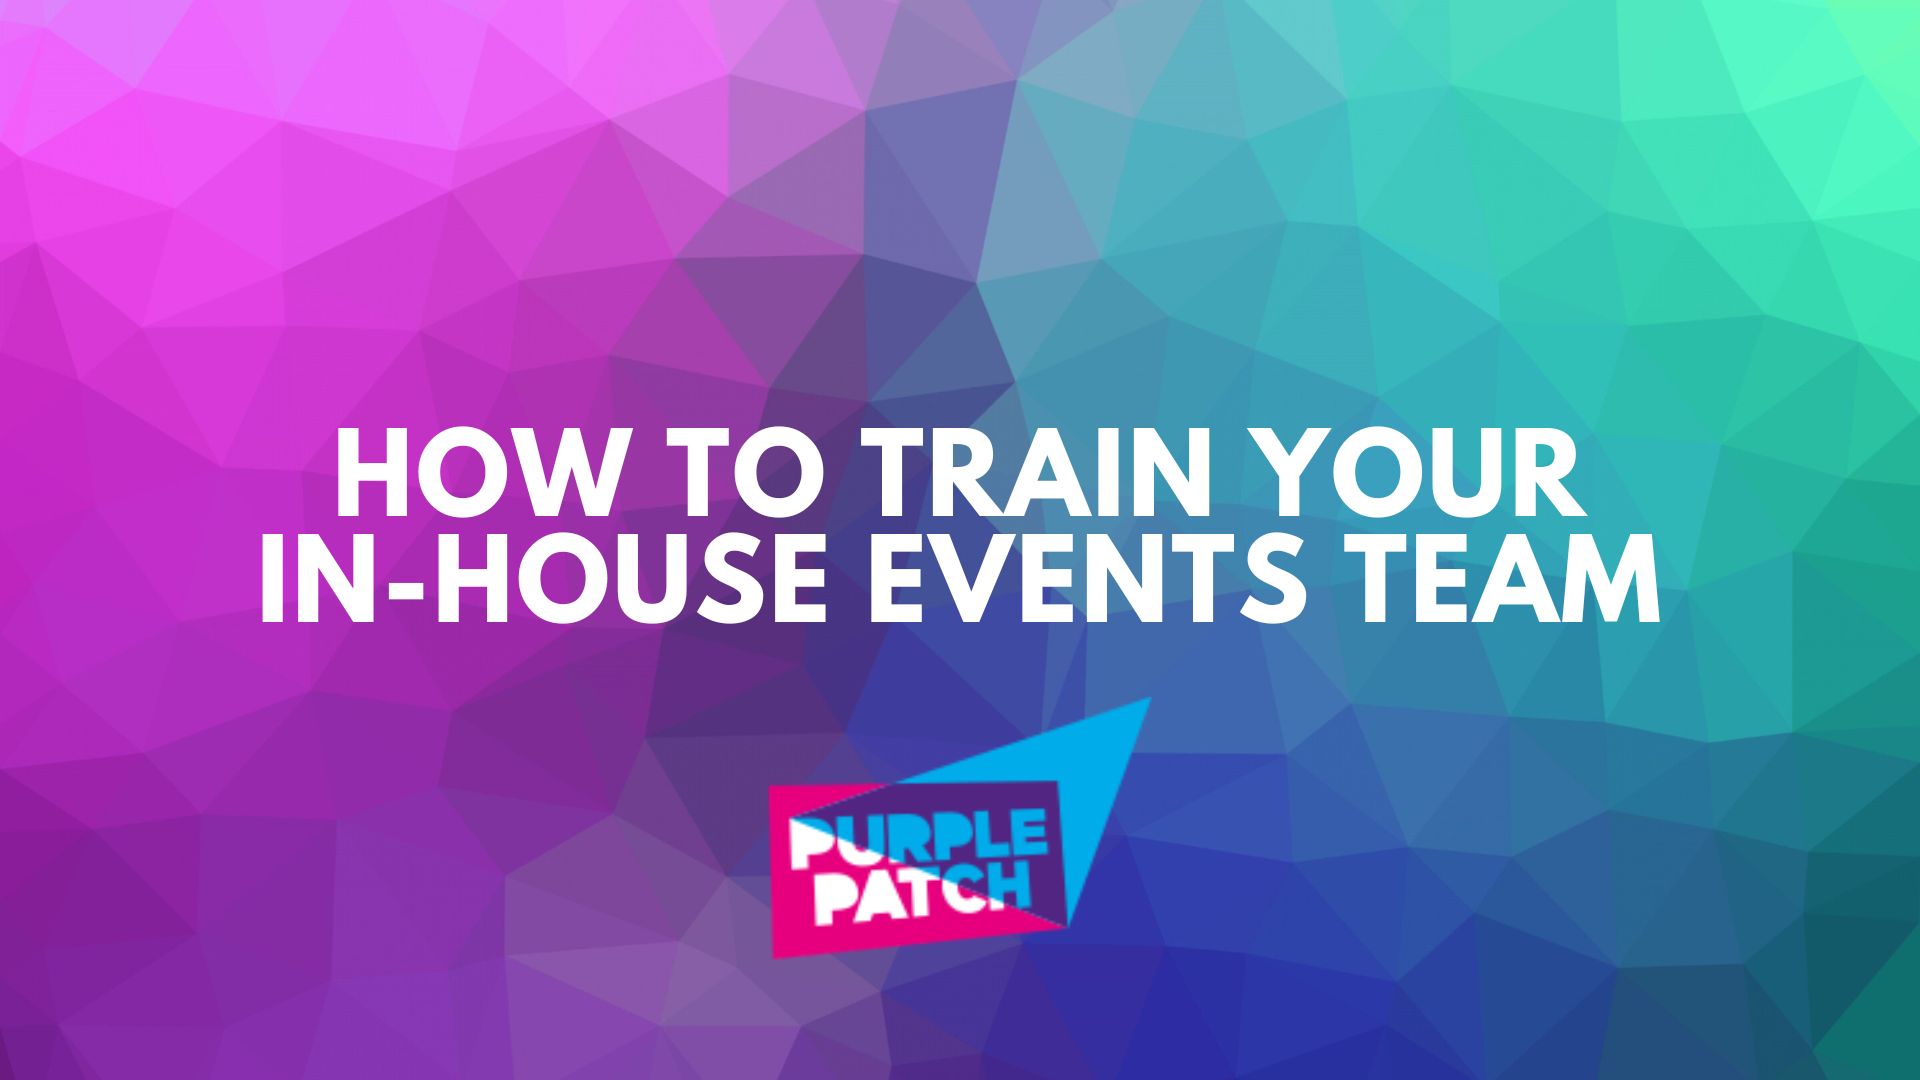 How to Train Your In-House Events Team